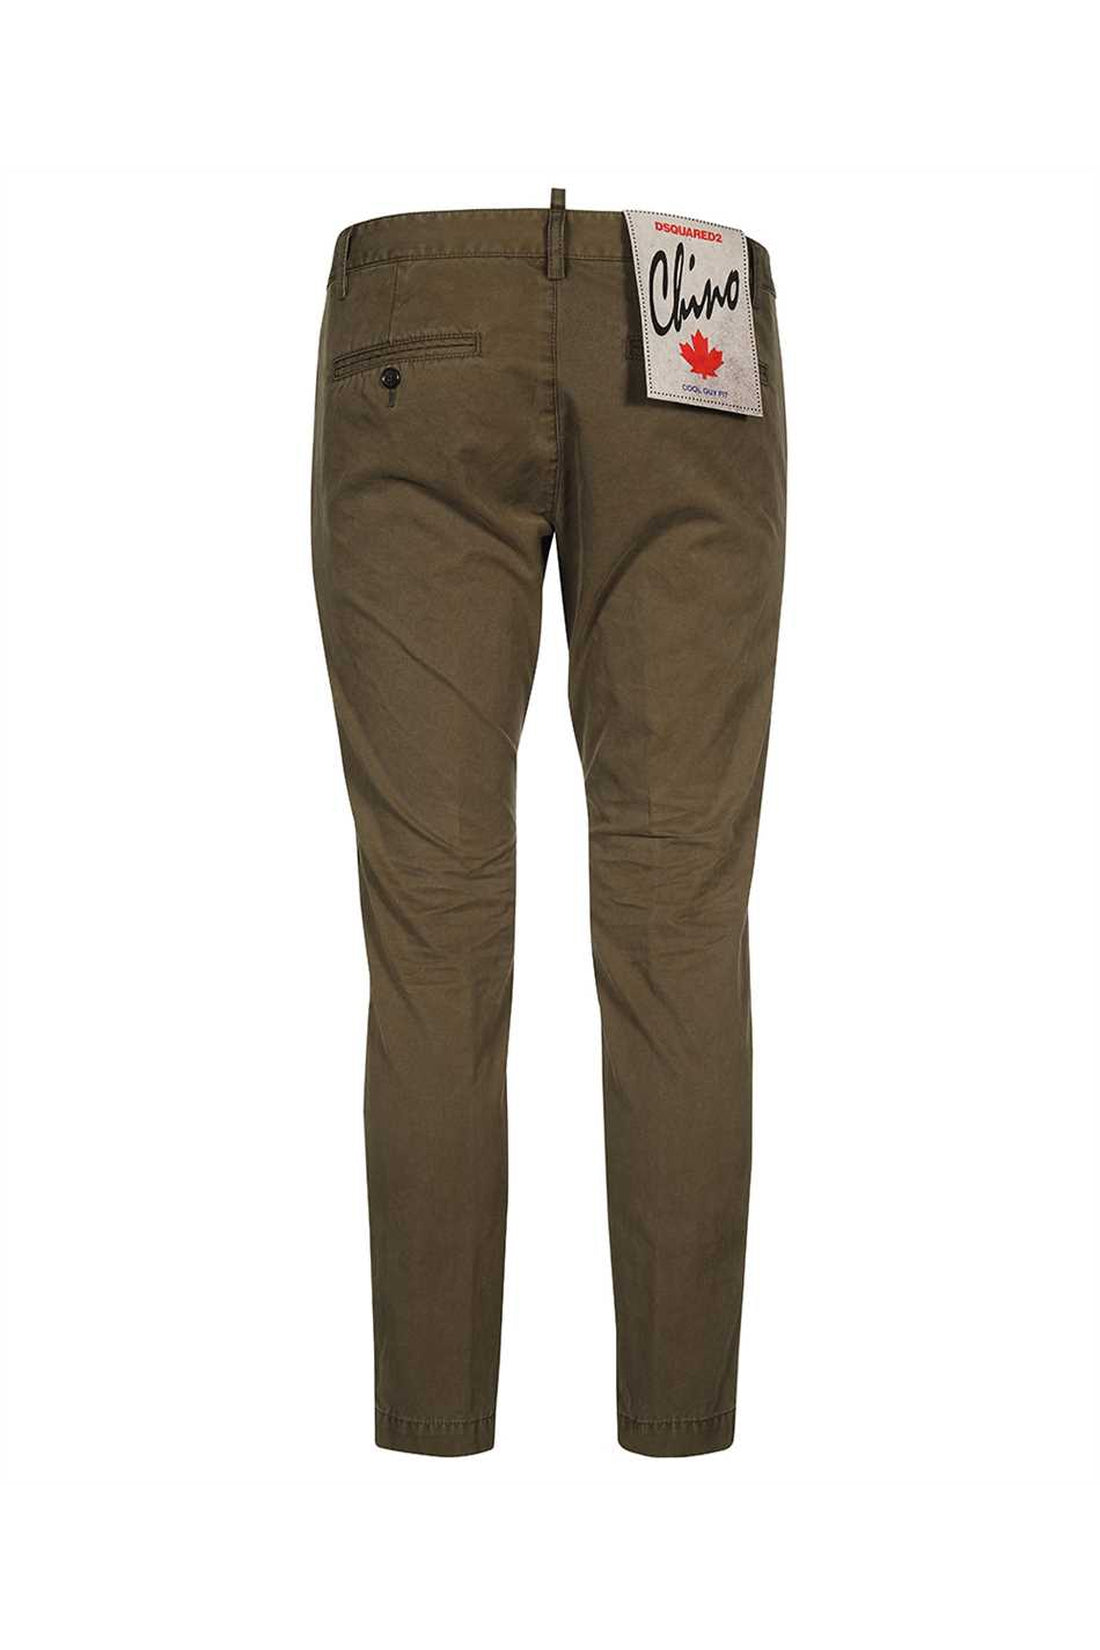 Dsquared2-OUTLET-SALE-Cotton Chino trousers-ARCHIVIST